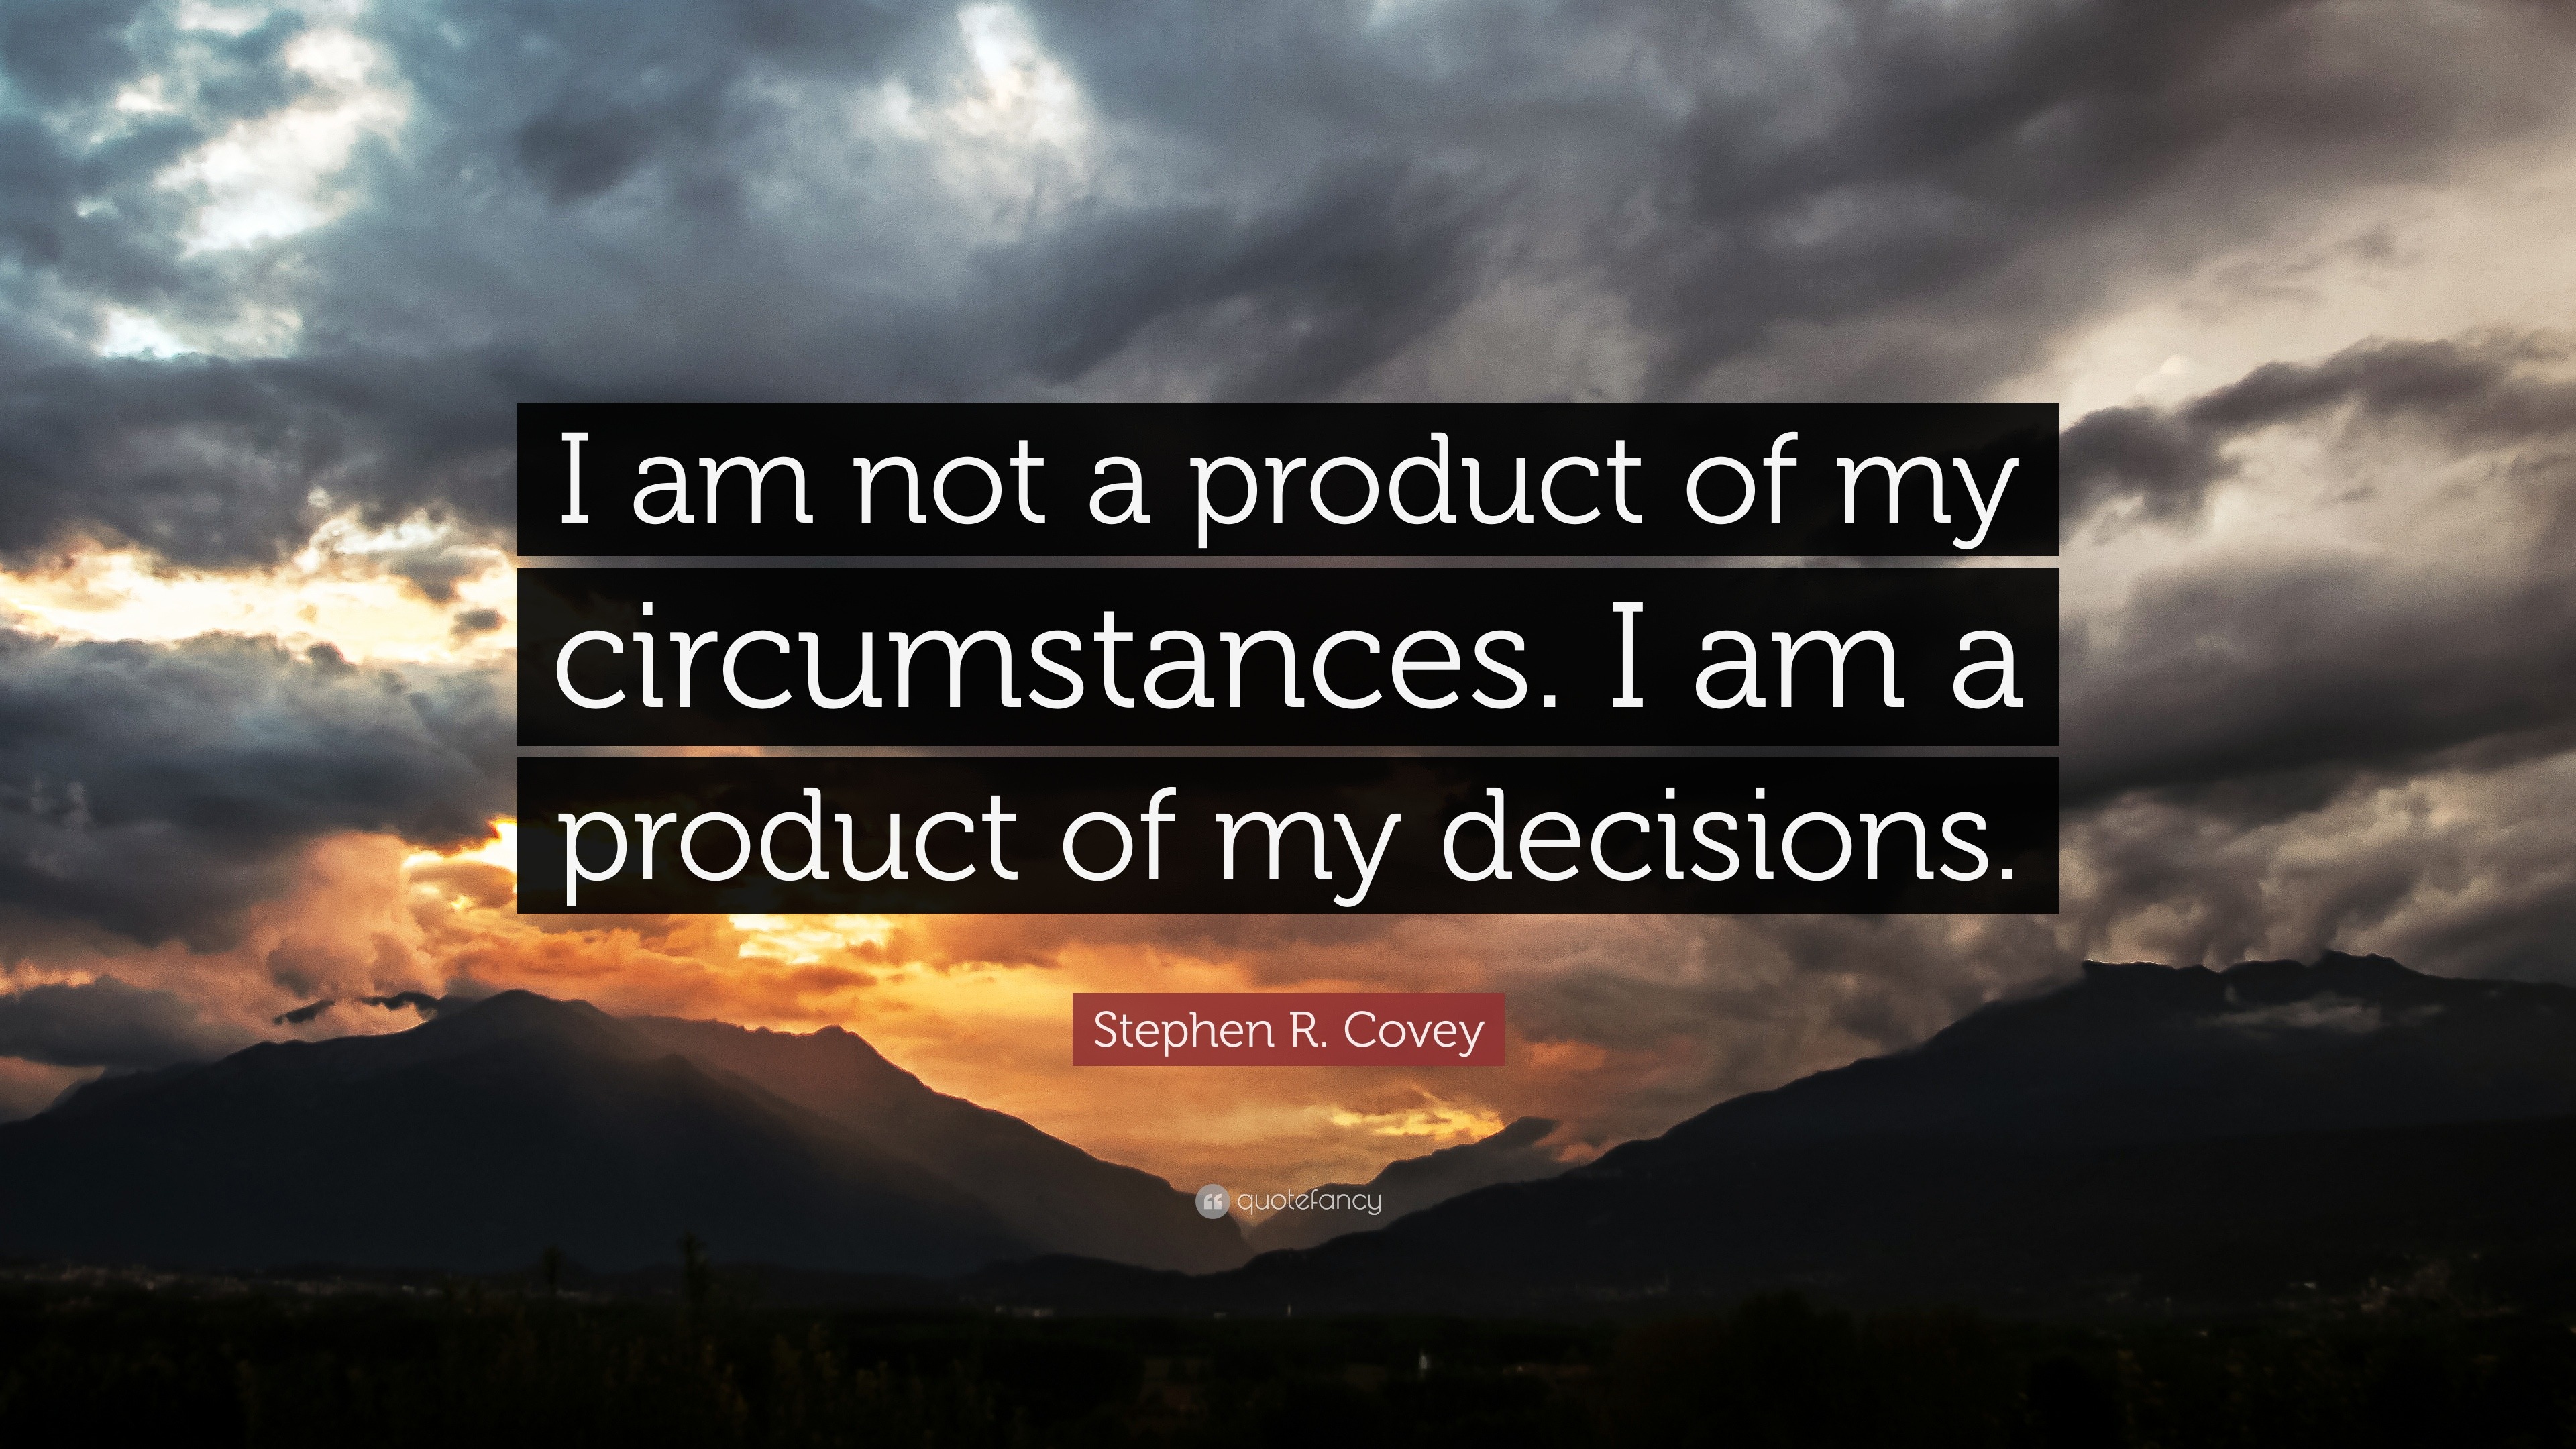 Stephen Covey quote I am a product of my decisions wall decal motivation quote 